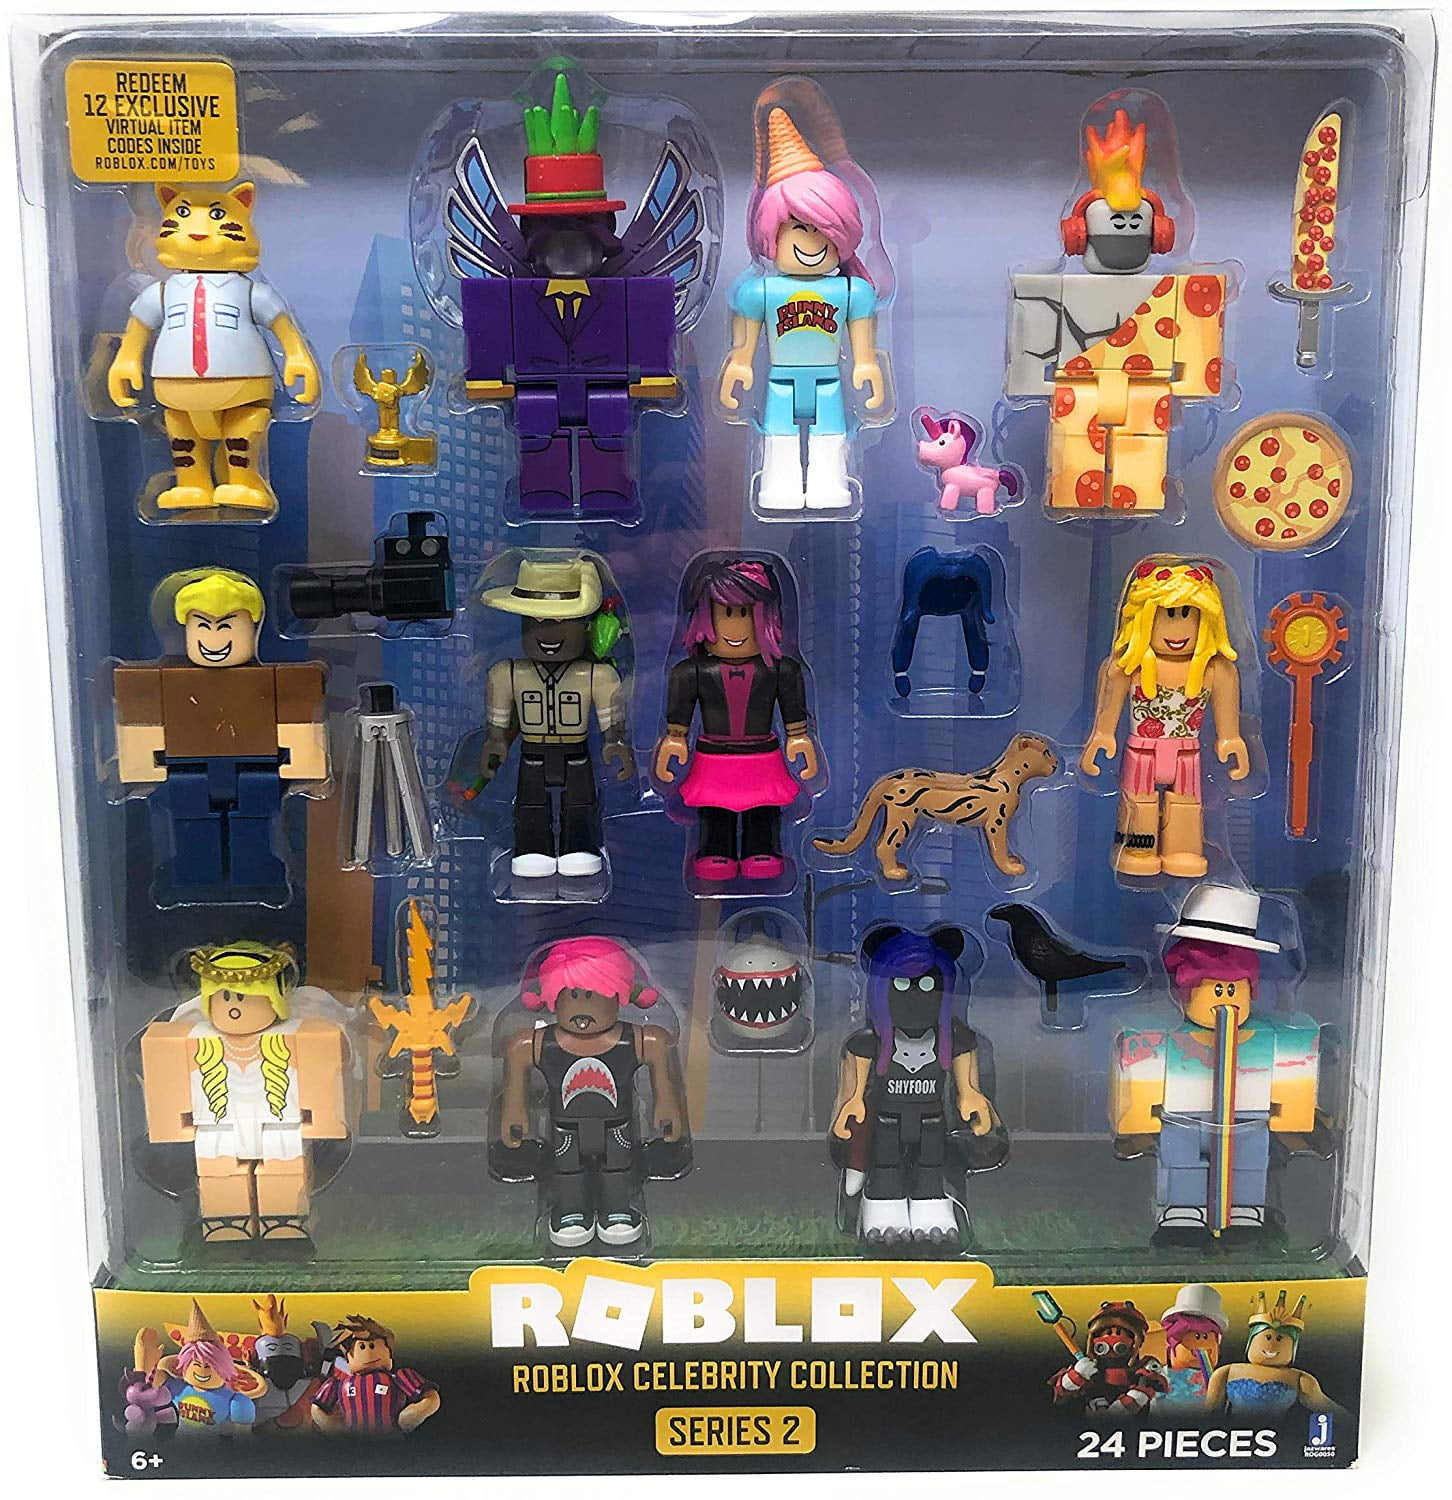 Roblox Series 2 Roblox Celebrity Collection 24 Piece Set Walmart Com Walmart Com - roblox action series 4 celebrity collection series 2 toys now